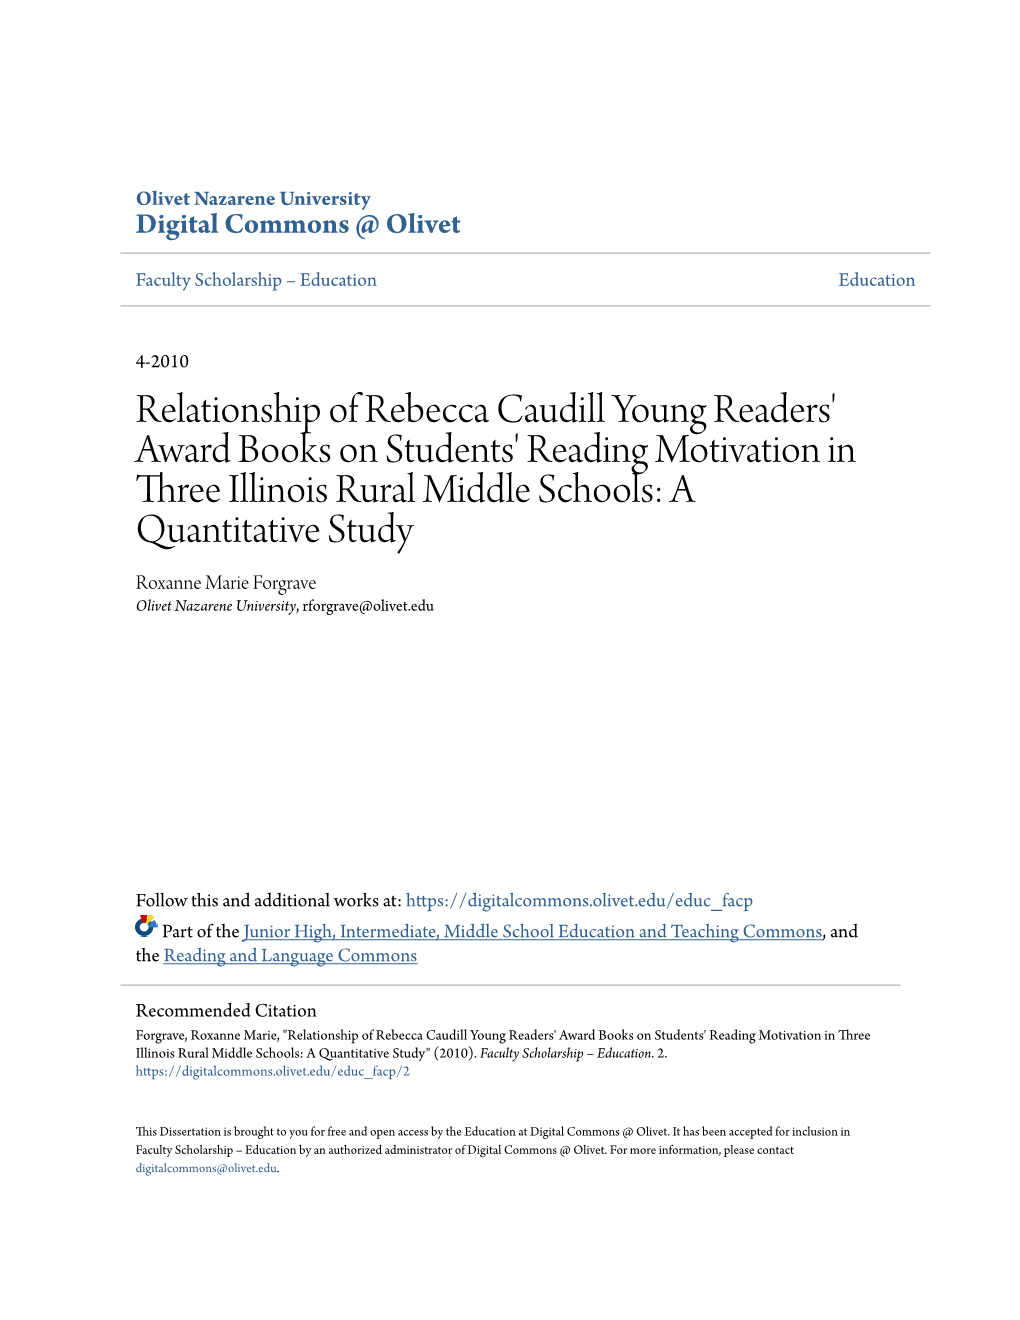 Relationship of Rebecca Caudill Young Readers' Award Books On